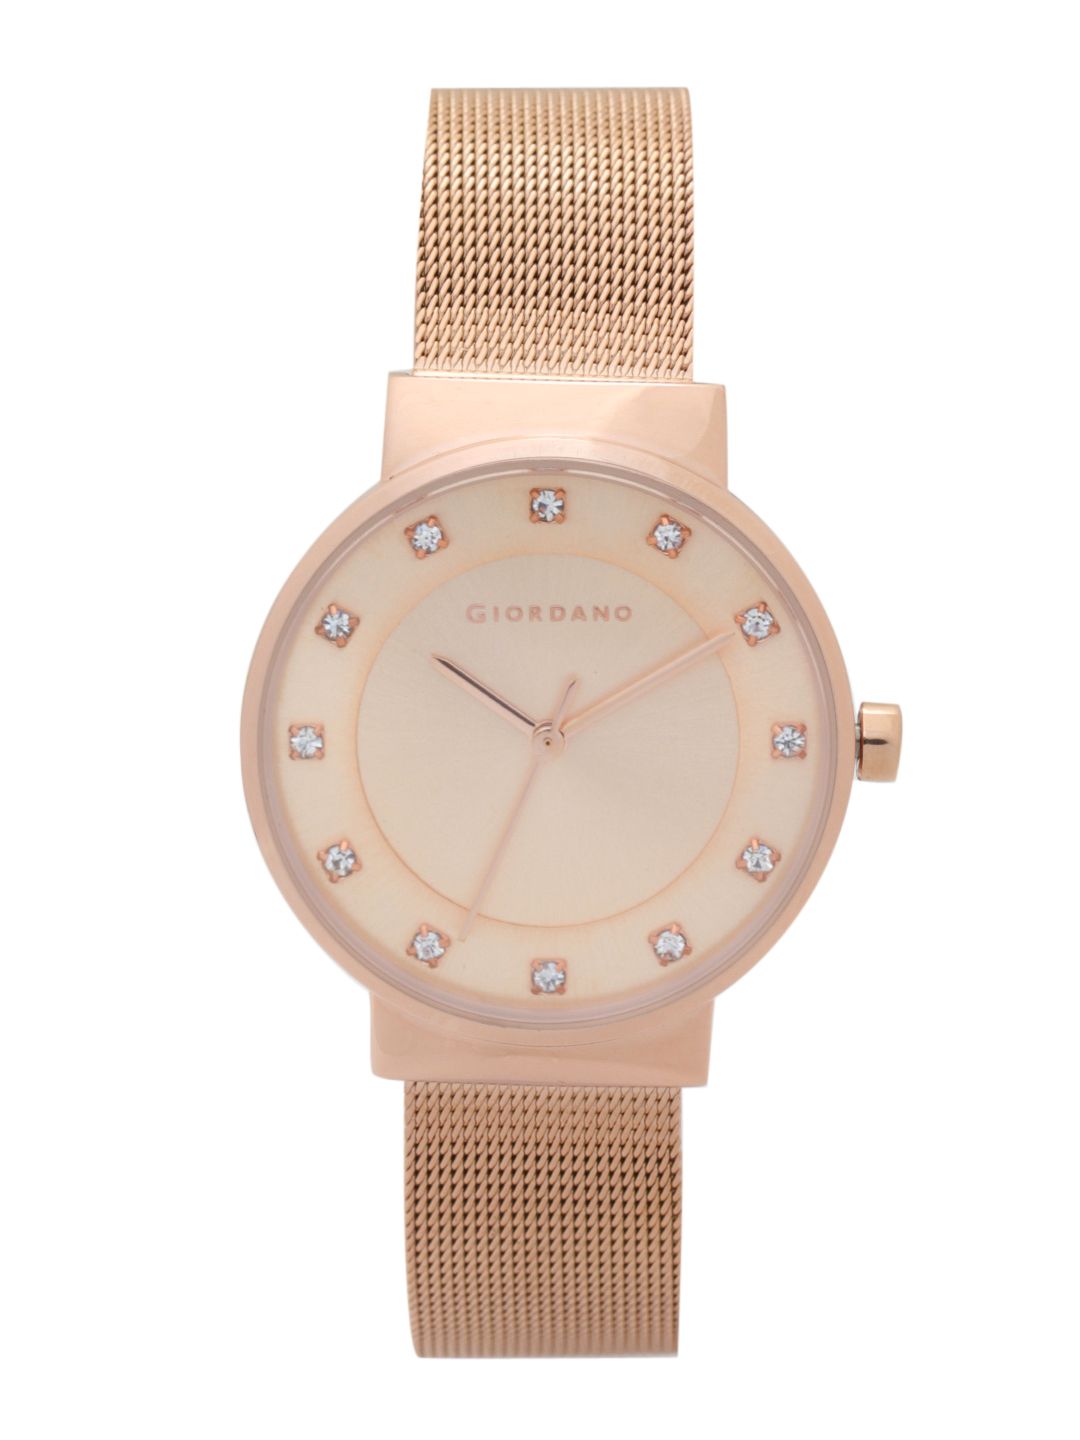 GIORDANO Women Gold-Toned Analogue Watch A2062-33 Price in India